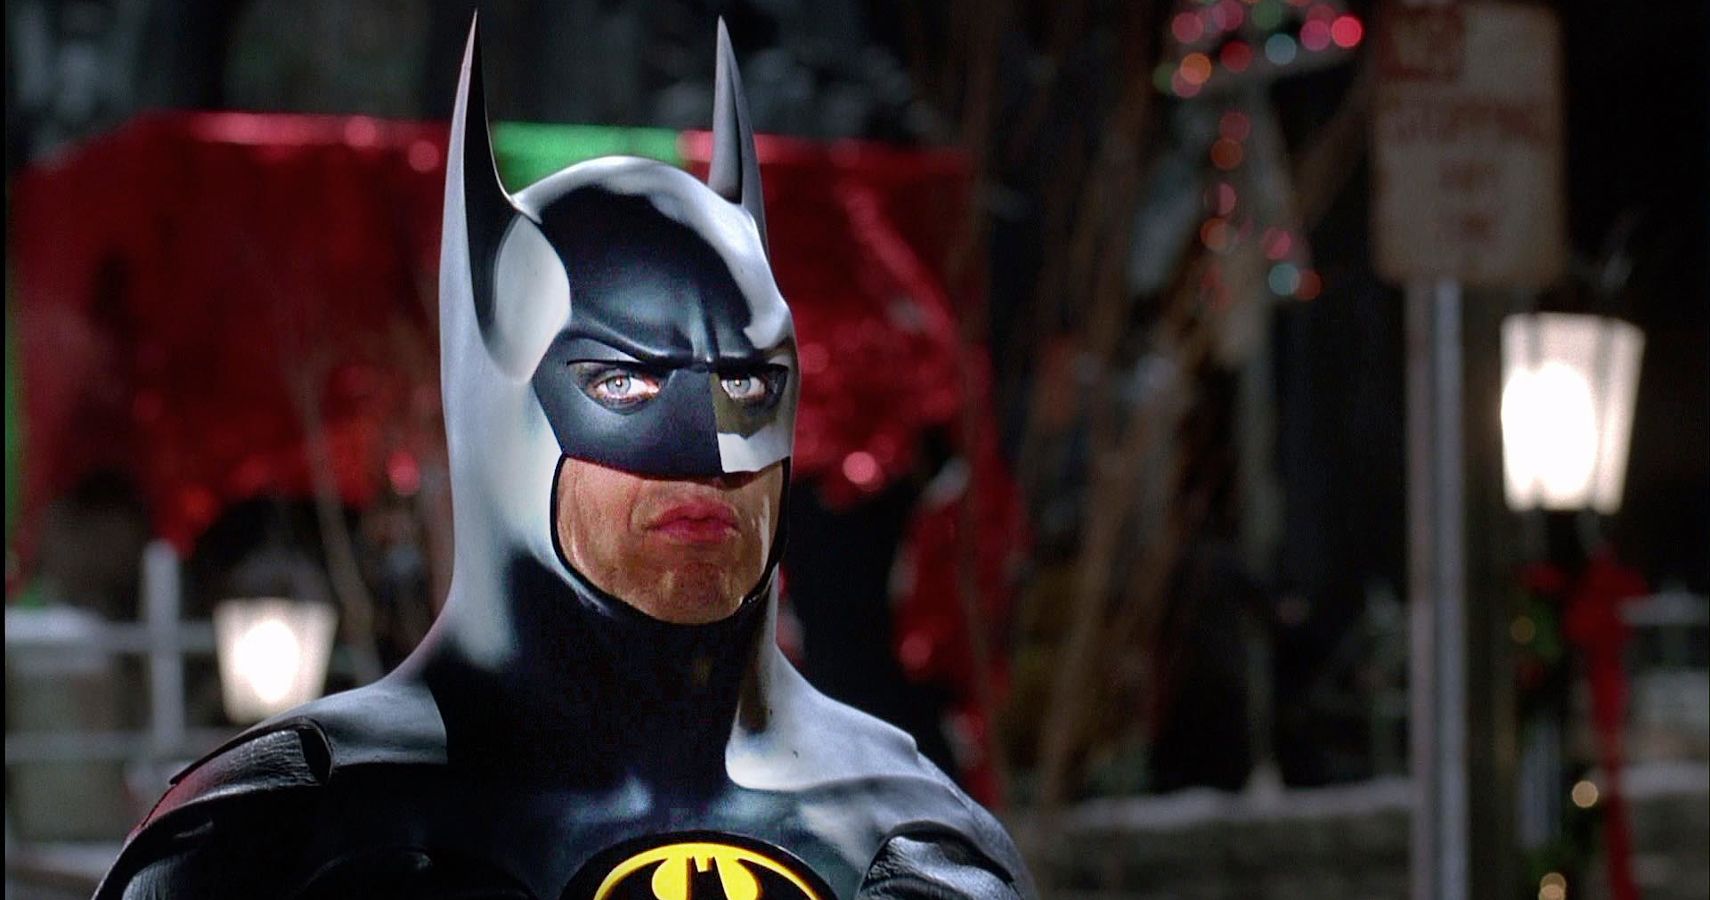 10 Behind-The-Scenes Facts About Michael Keaton's Batman